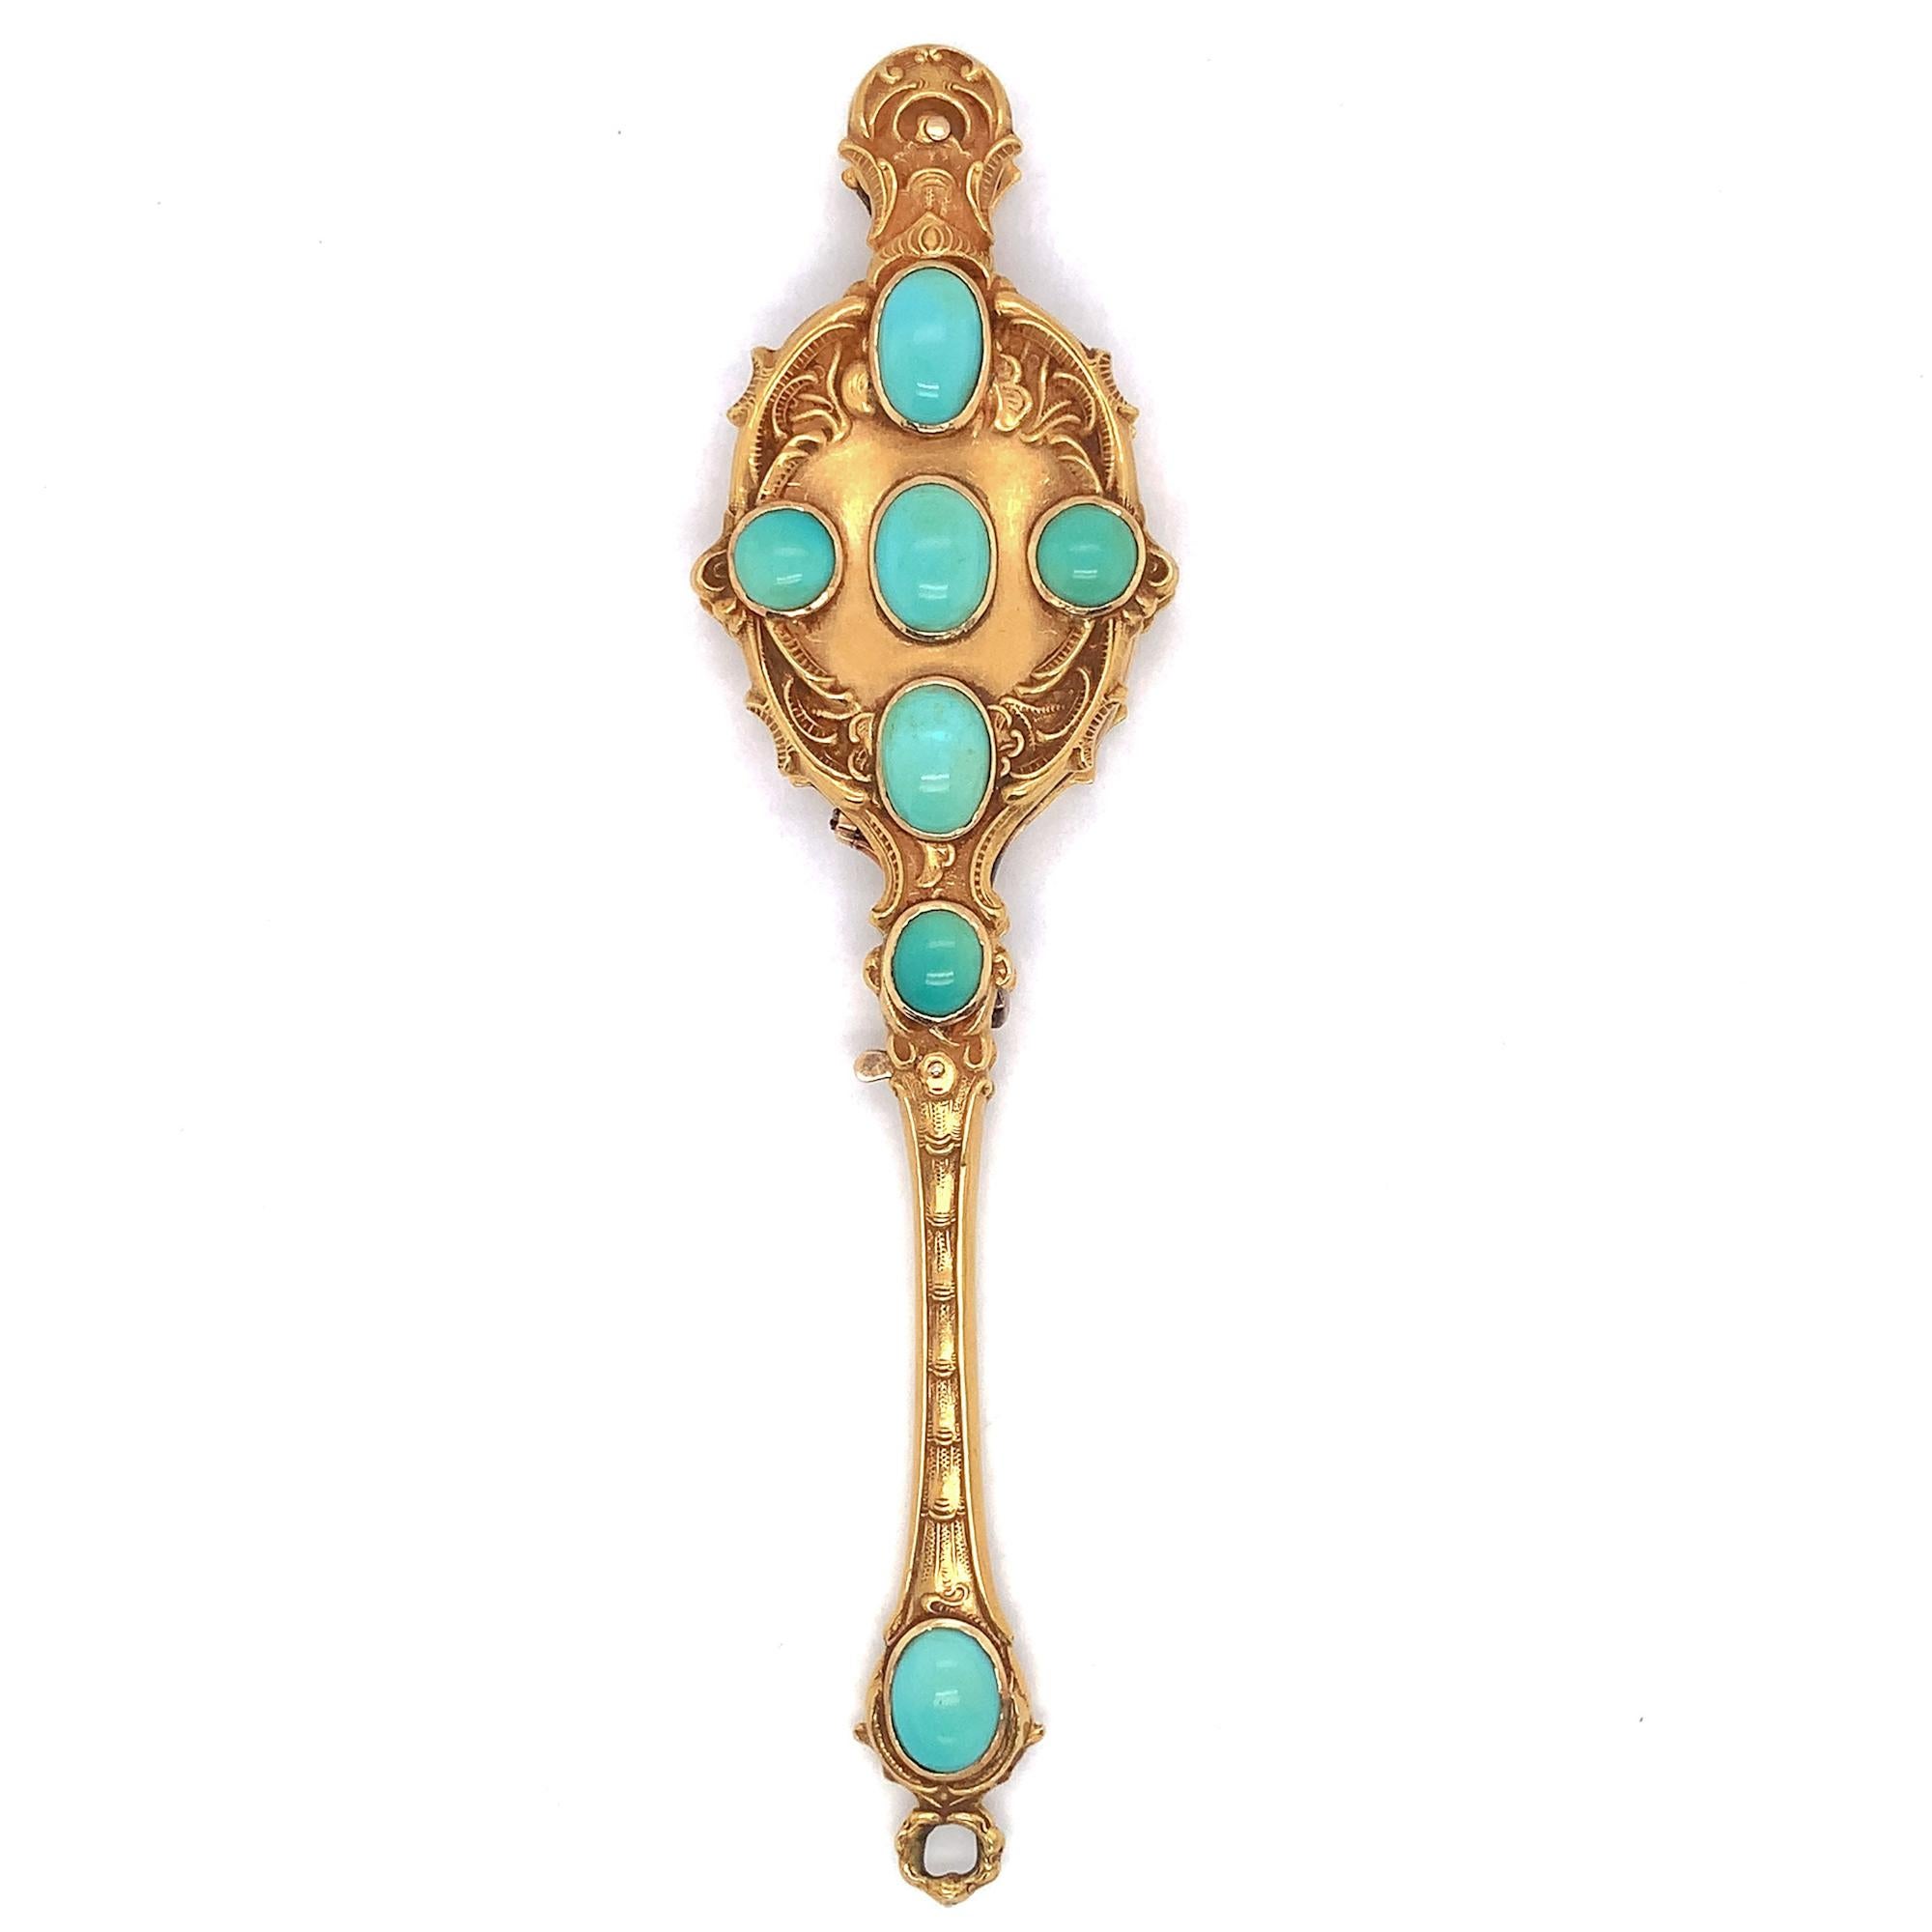 Black Starr & Frost 14K yellow gold Art Nouveau lorgnette or opera glasses with 7 natural turquoise gemstone cabochons. It measures 4 7/8” long and 1 1/4